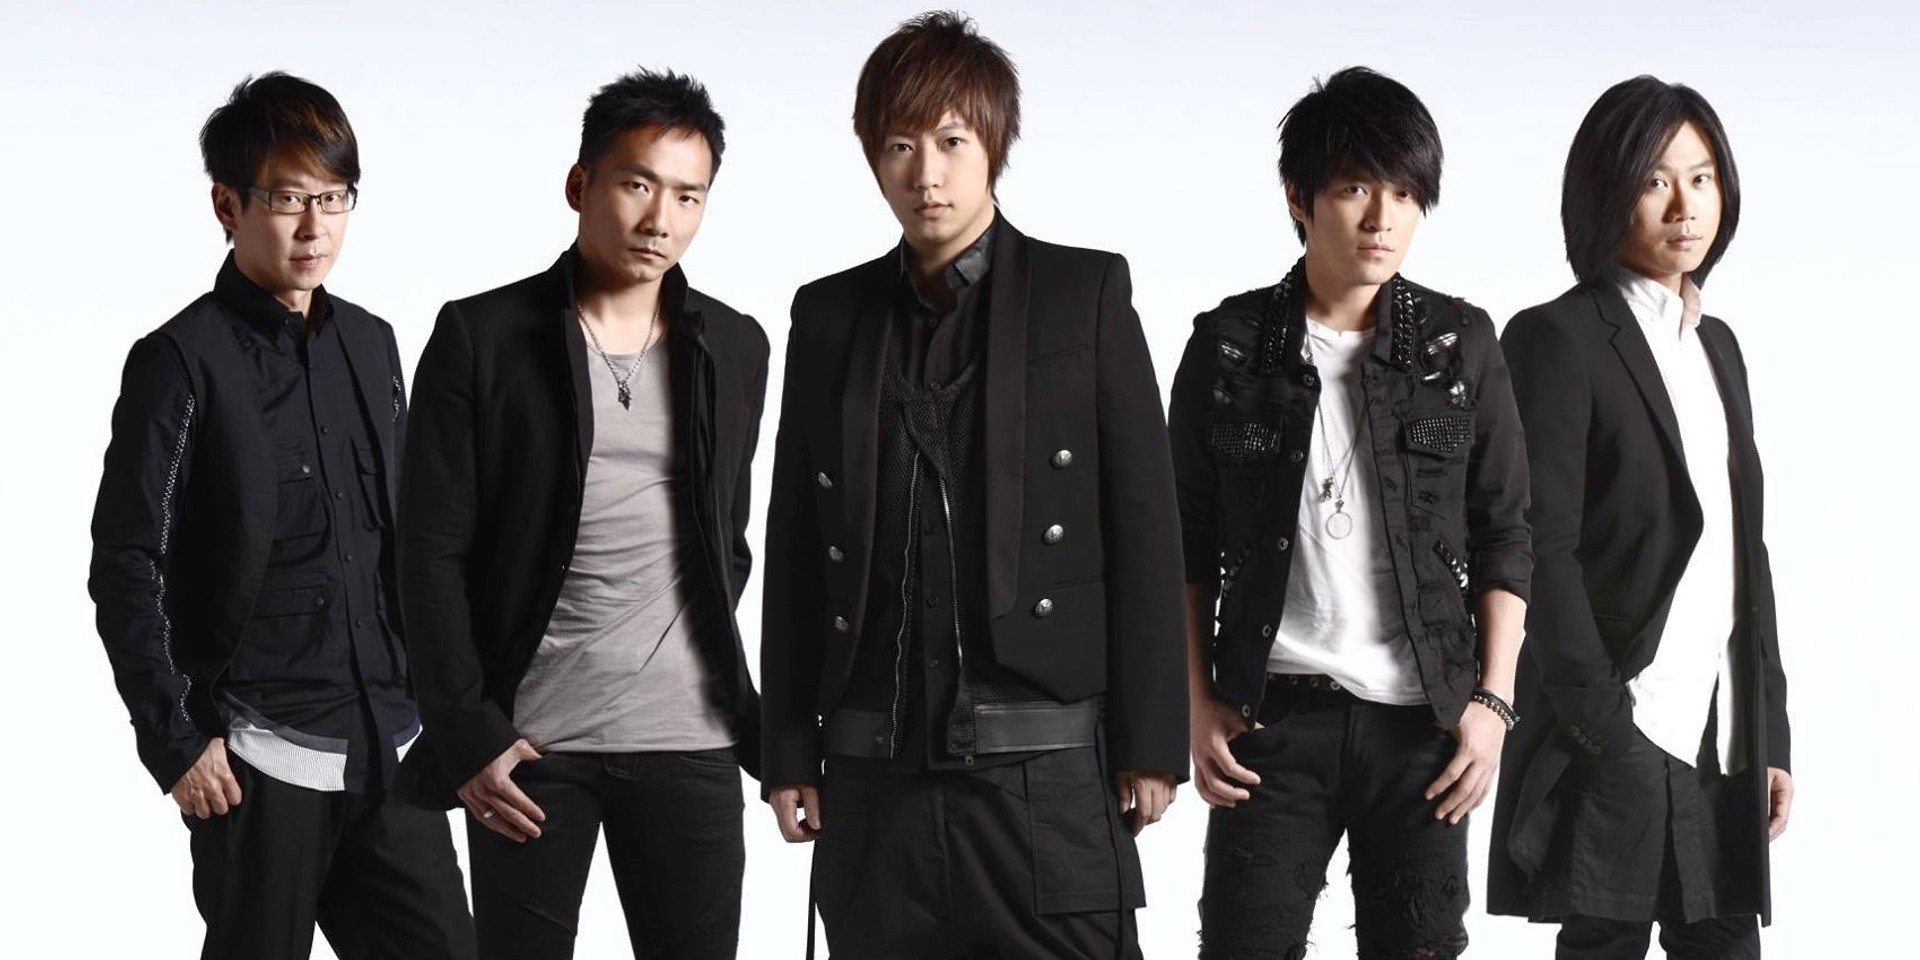 MAYDAY to return to Singapore this August